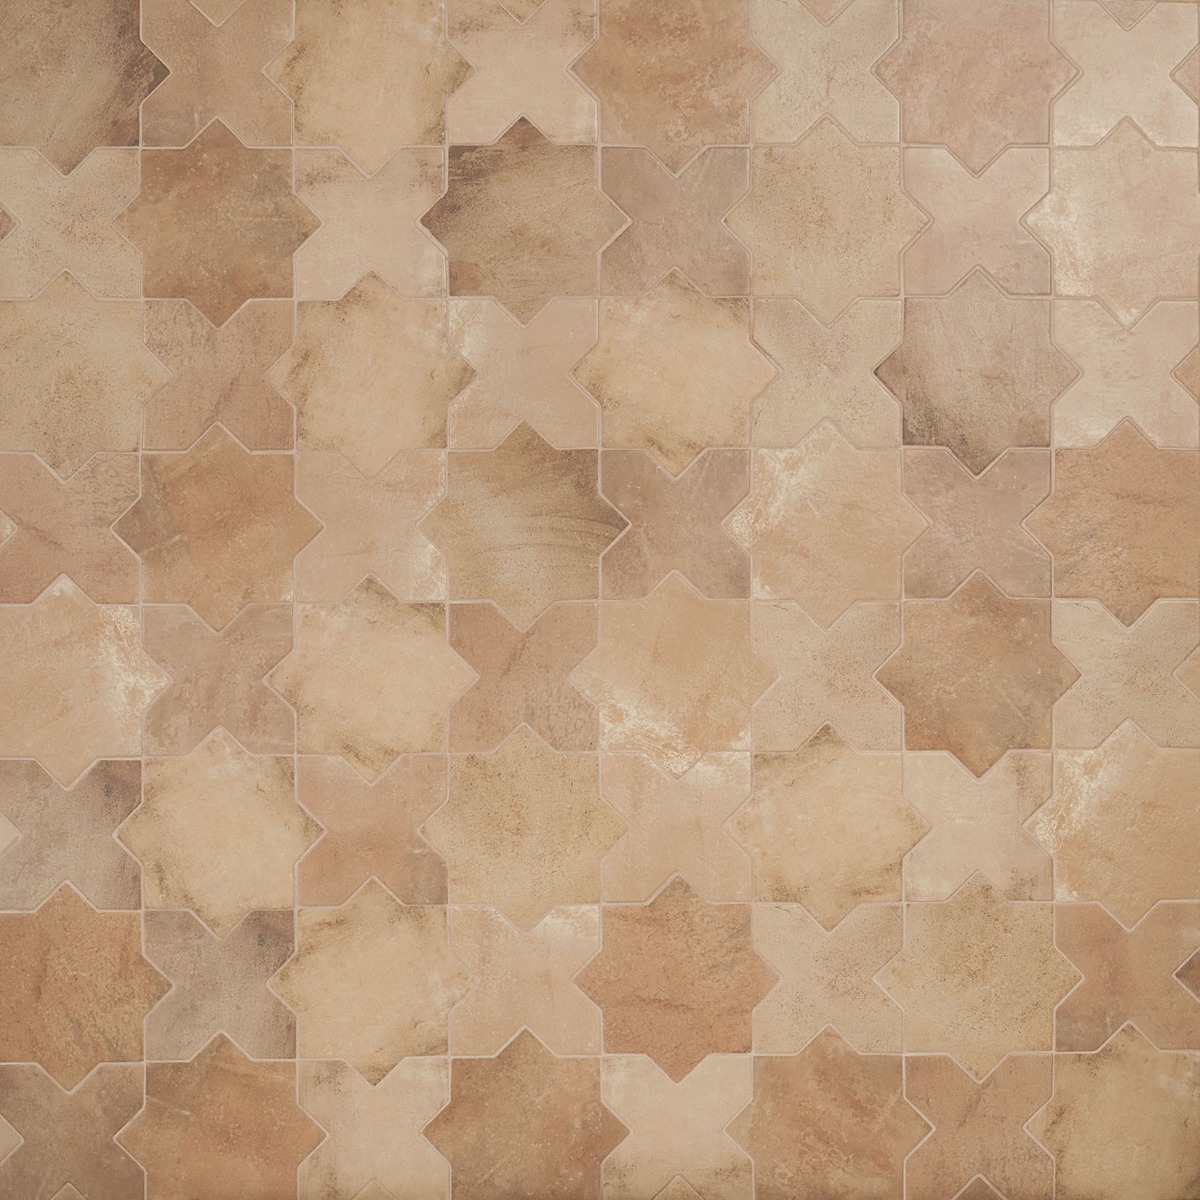 Not for Sale-Parma Cotto Brown Matte Star and Cotto Brown Matte Cross 6" Terracotta Look Porcelain Tile